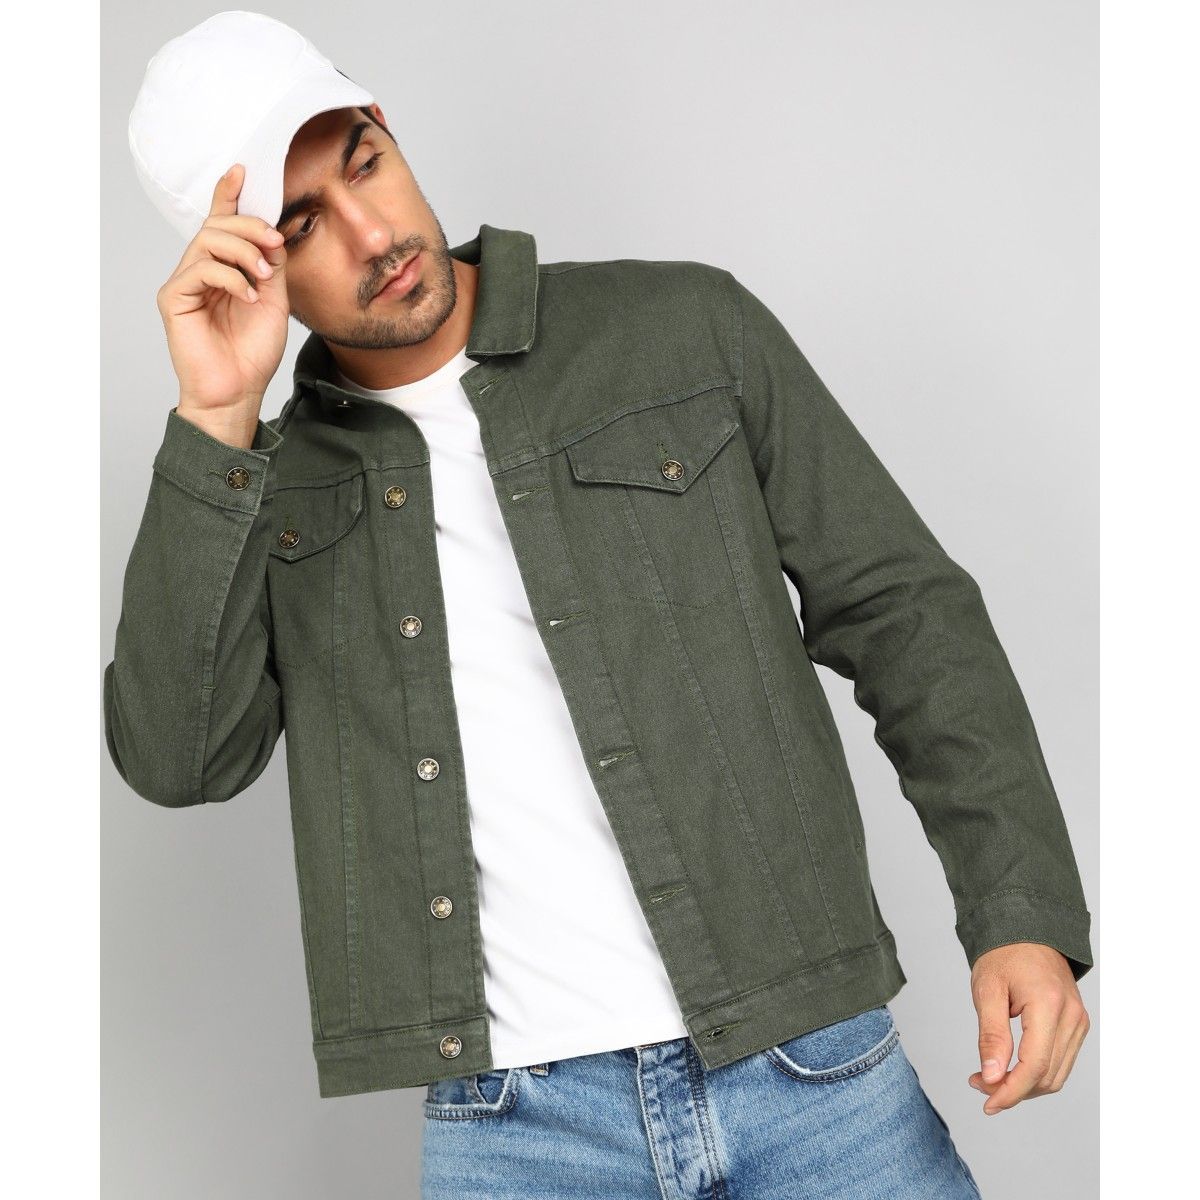 LRG Men's Lifted Research Collection Hooded Denim Jacket, Olive, L at  Amazon Men's Clothing store